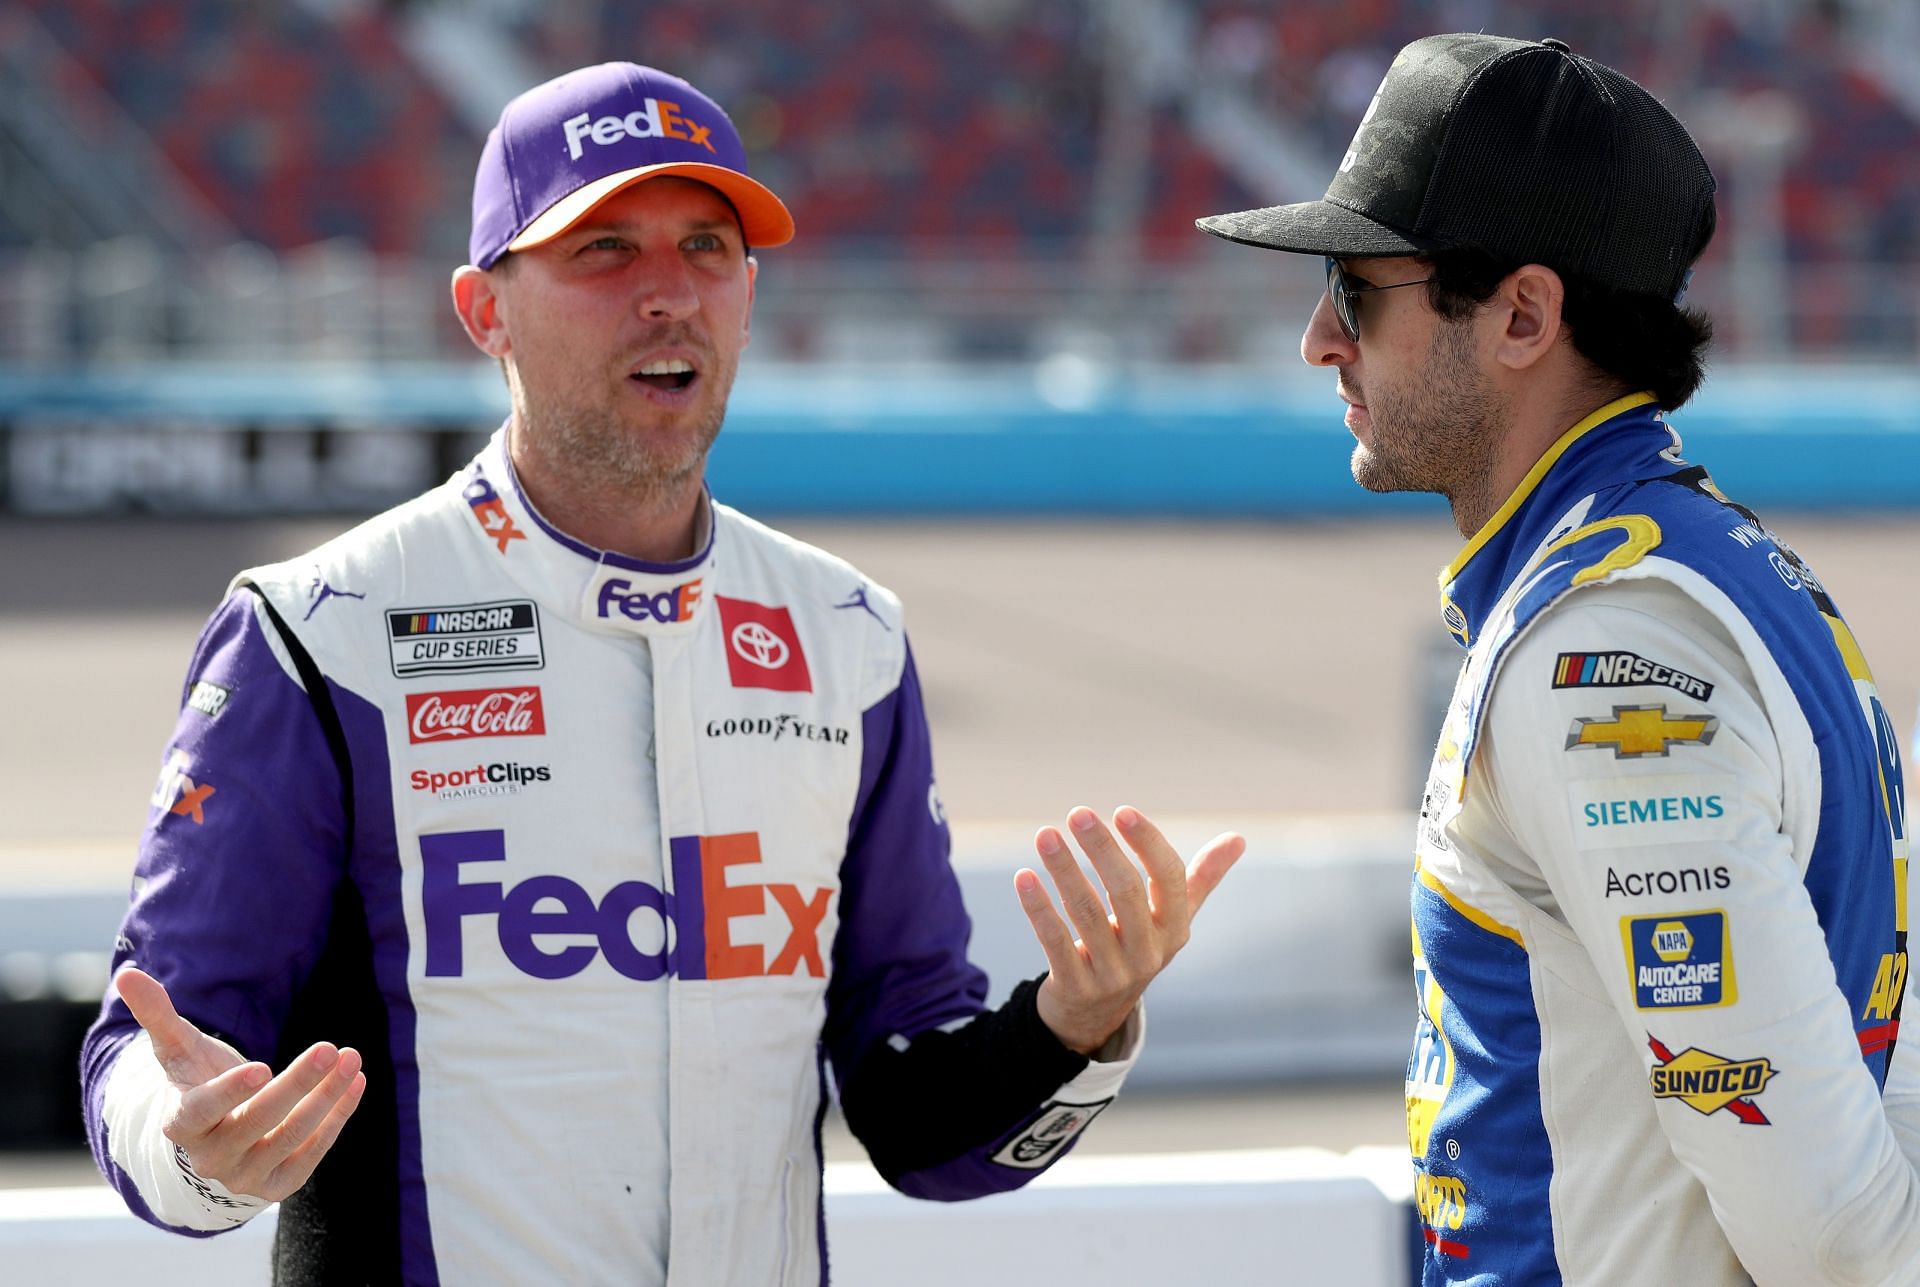 “Bullsh*t move” - Denny Hamlin lashes out at Chase Elliott for contact ...